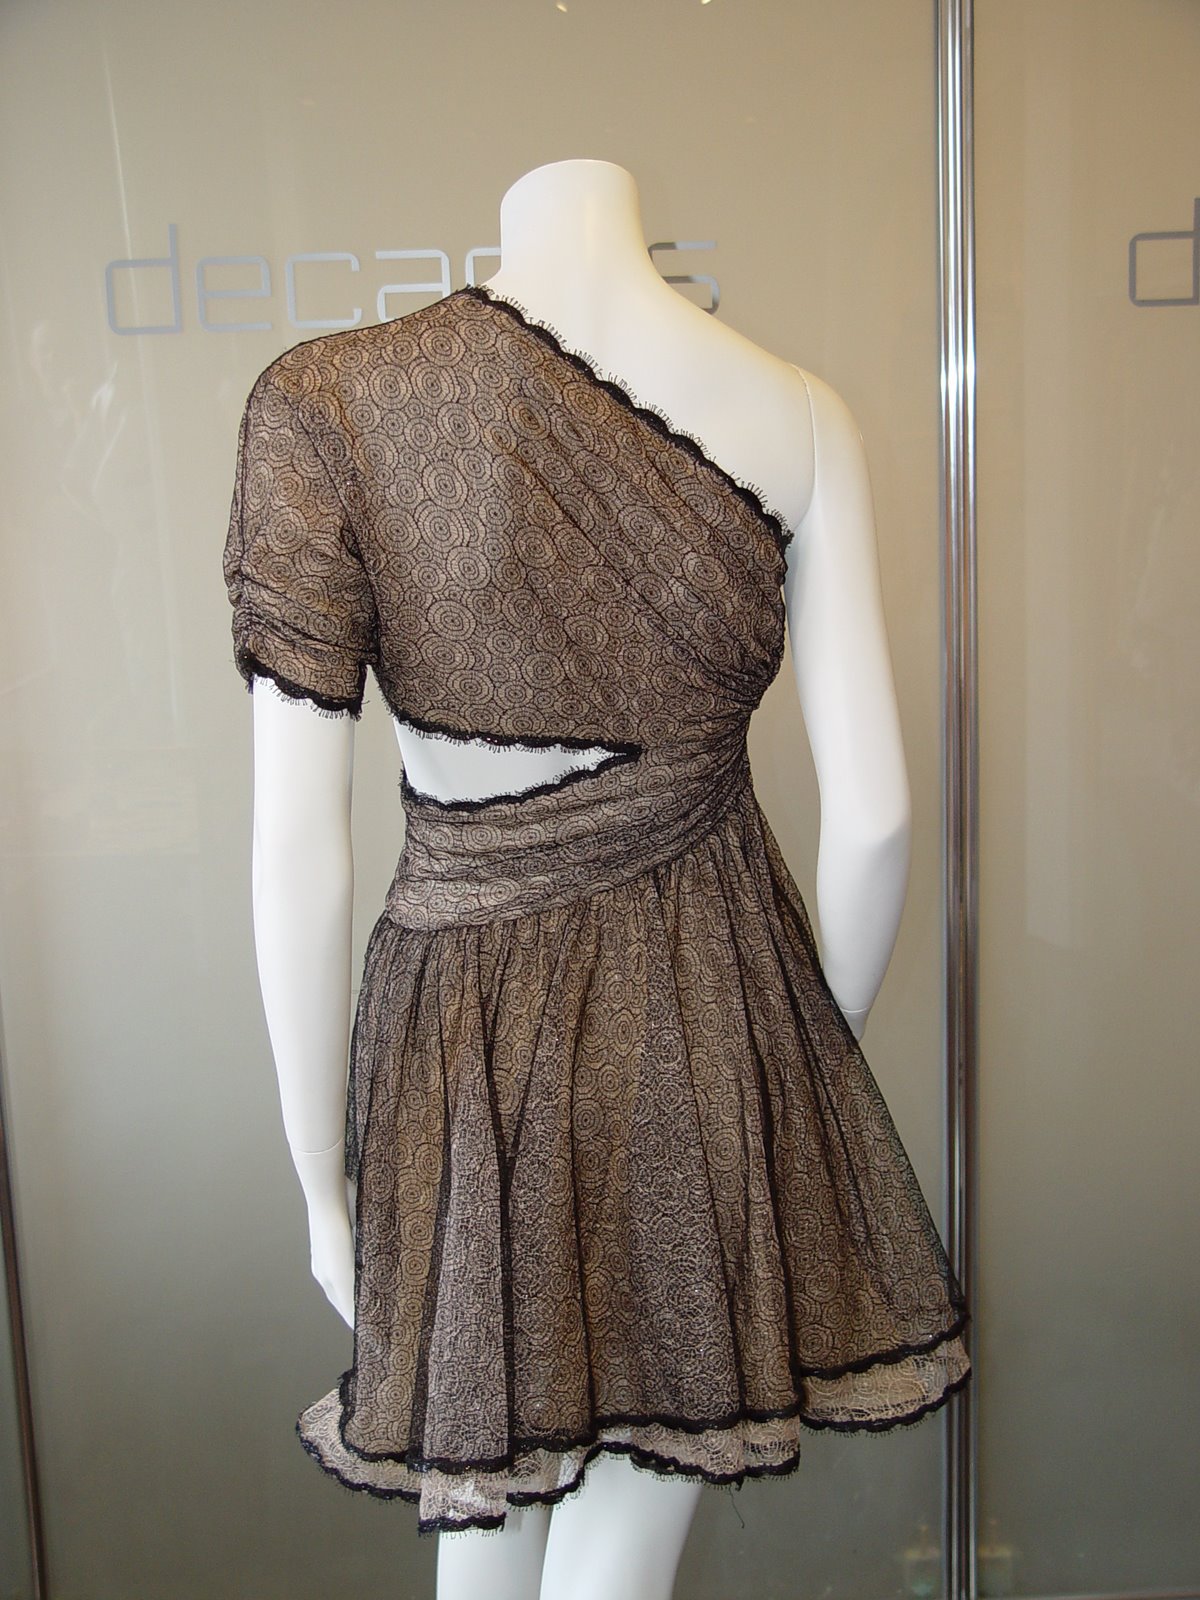 [GEOFFREY+BEENE+NUDE+CHIFFON+WITH+LACE+OVER+LAY+ONE+SHOULDER+CUT+OUT+DRESS+SIZE+4+C+EARLY+90S.JPG+(1).JPG]